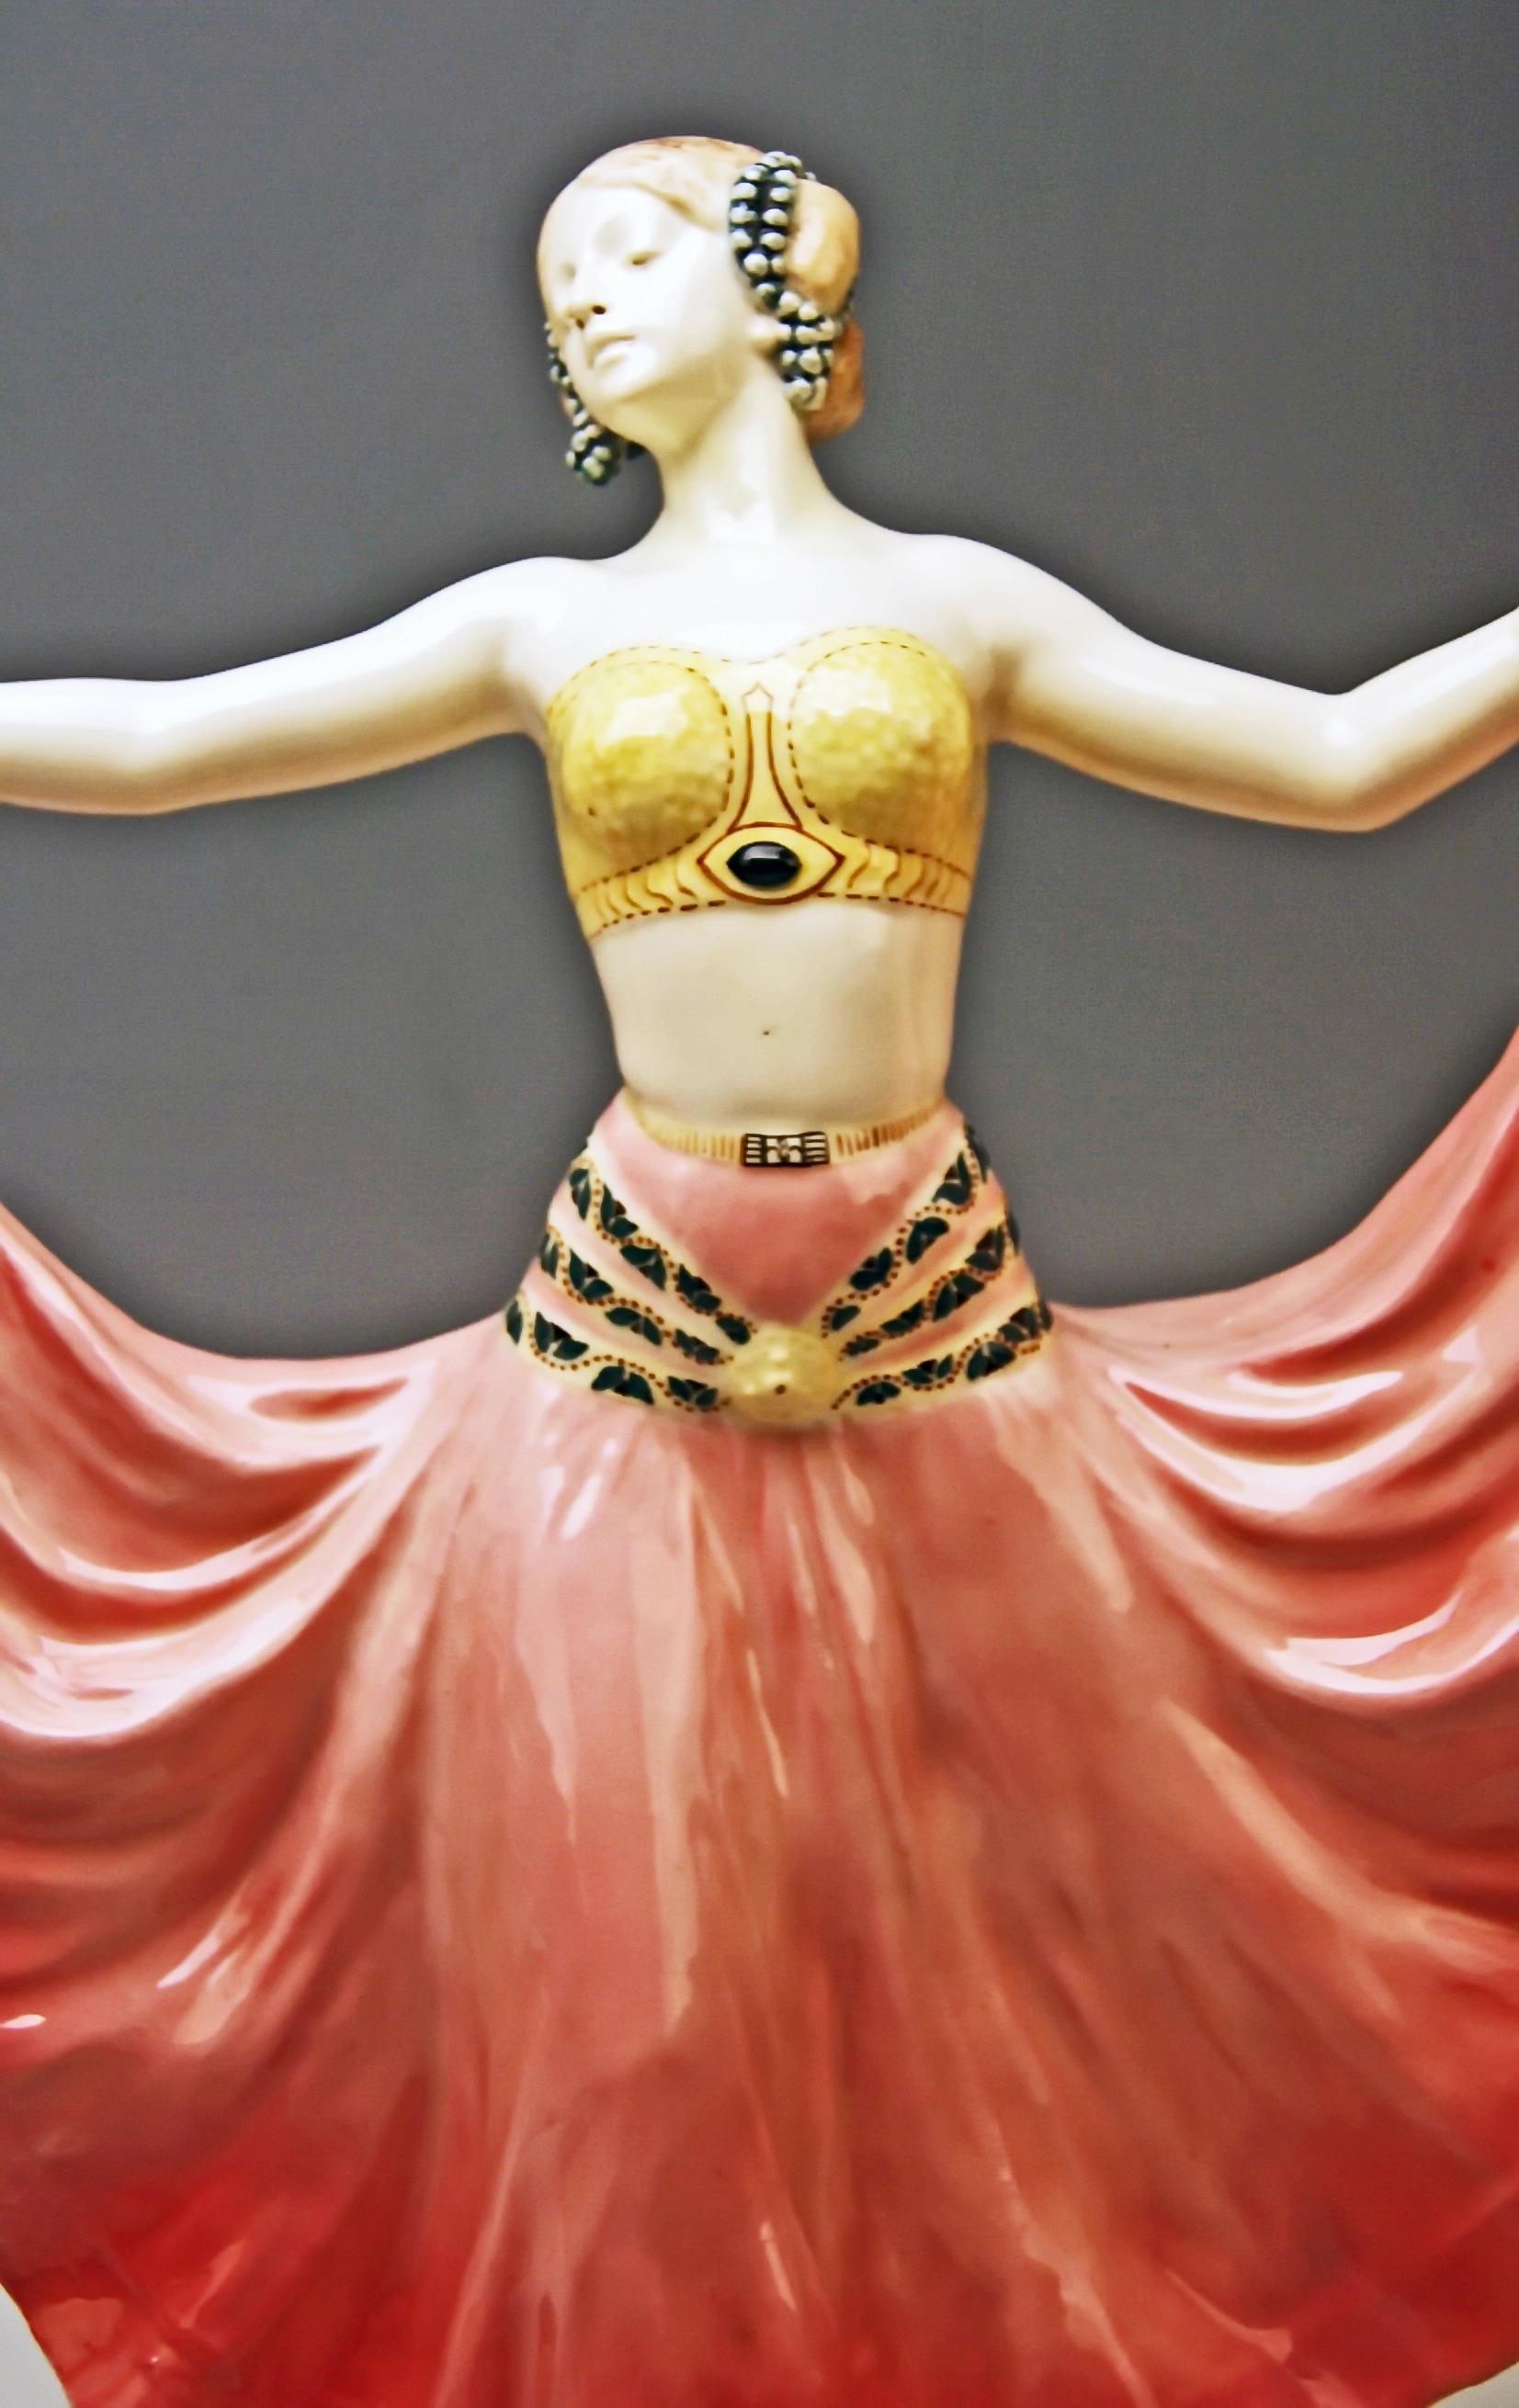 Early 20th Century Goldscheider Vienna Lady Dancer Ruth, Rosé Model 4141 Early Made circa 1912-1913